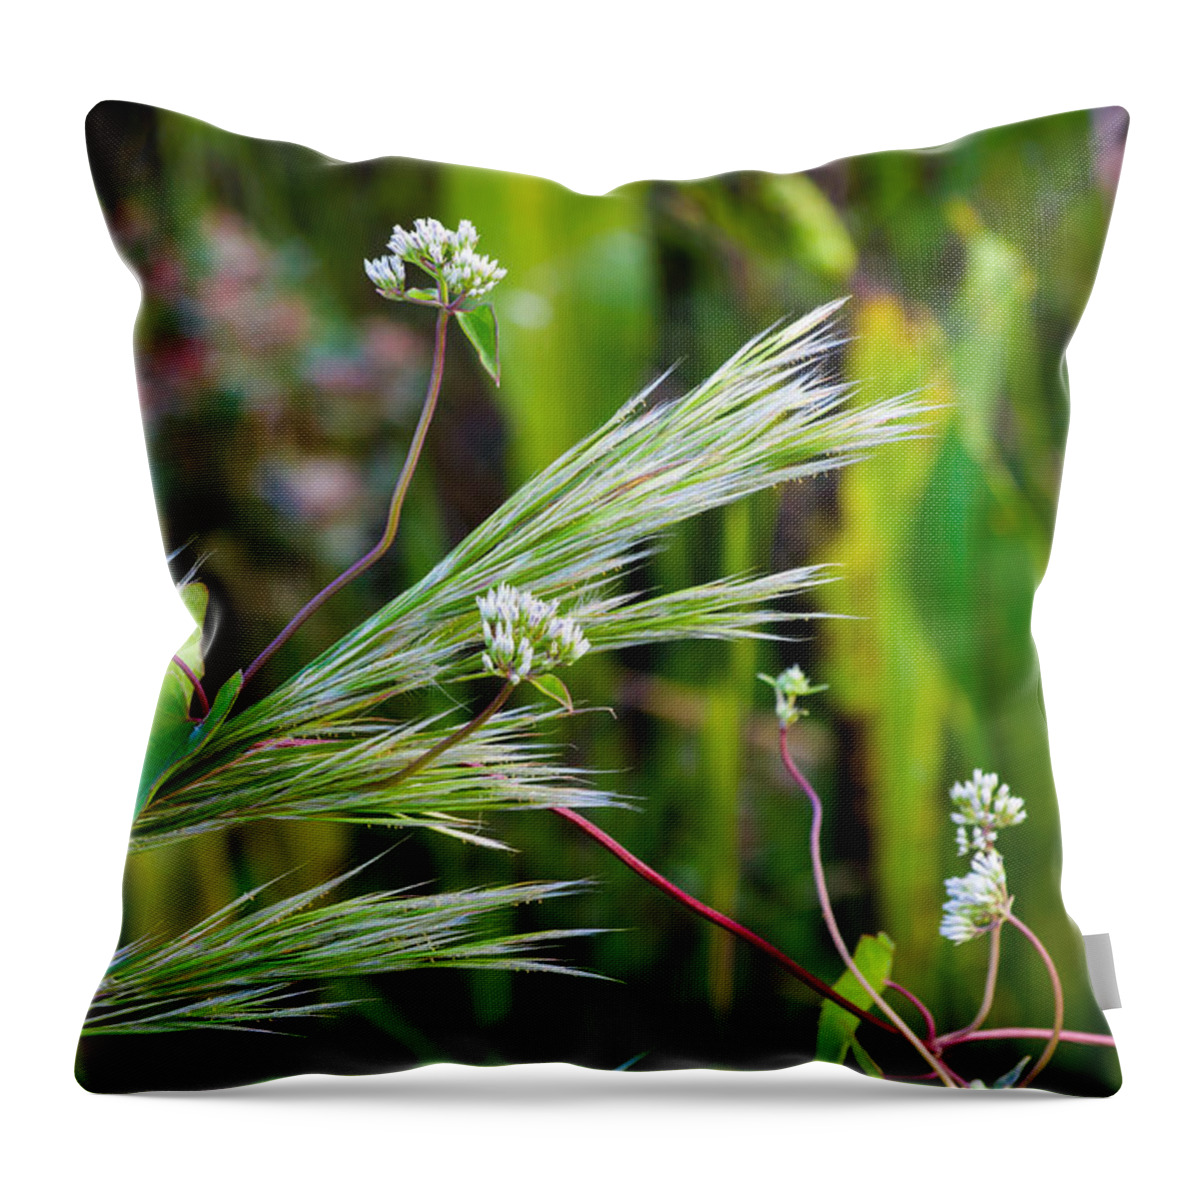 Wild Flowers Throw Pillow featuring the photograph Wildflowers and Grasses by Ed Gleichman